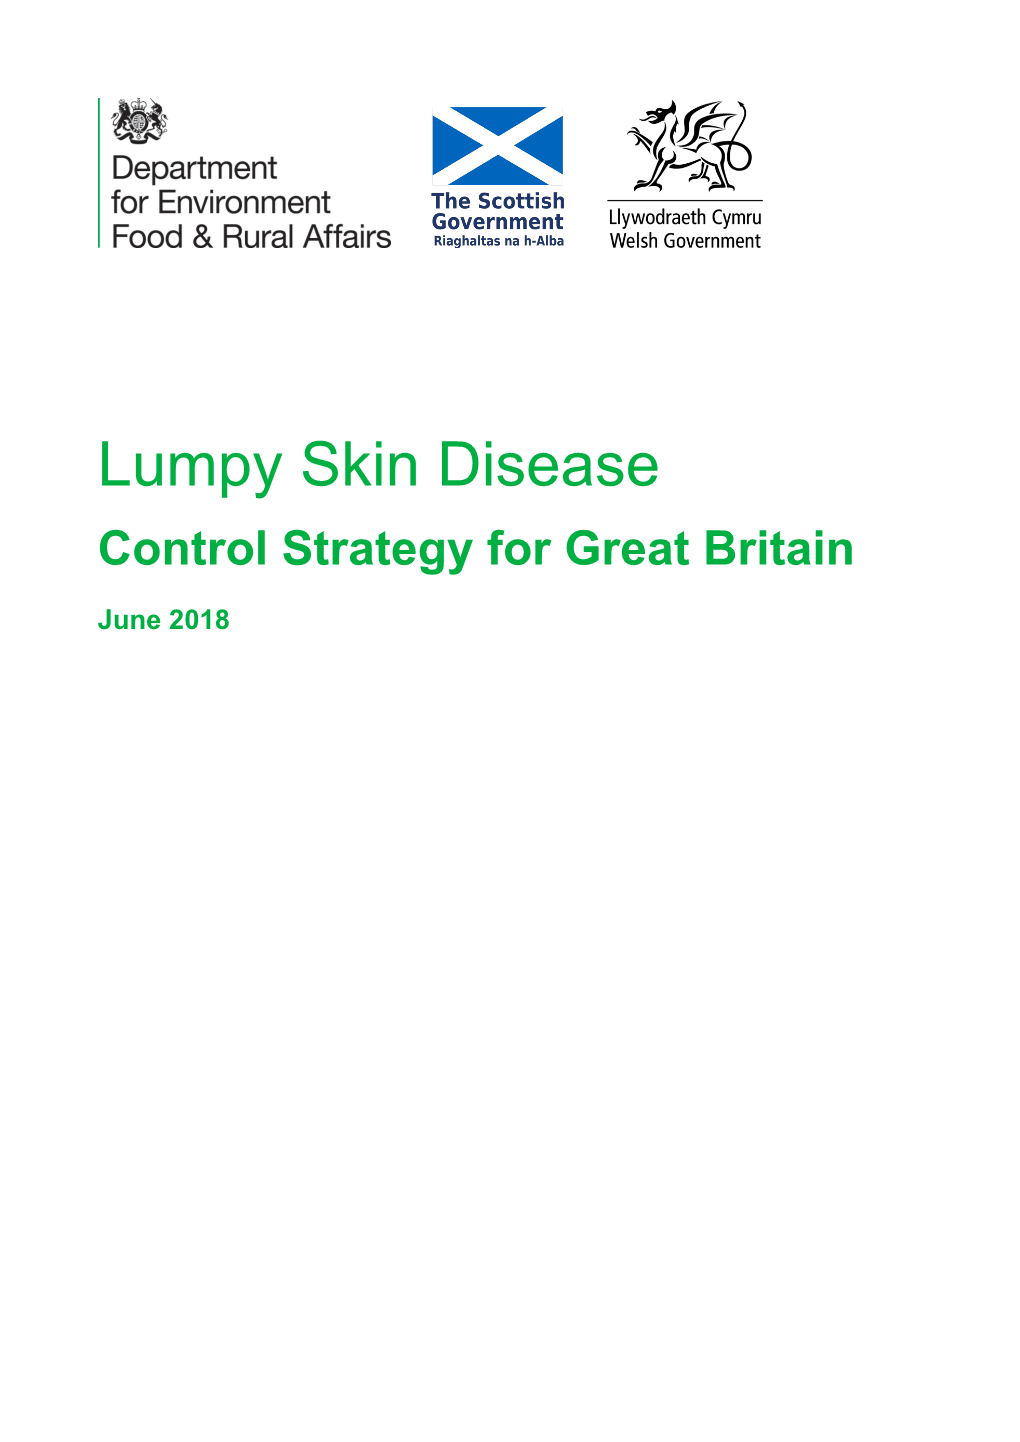 Lumpy Skin Disease Control Strategy for Great Britain